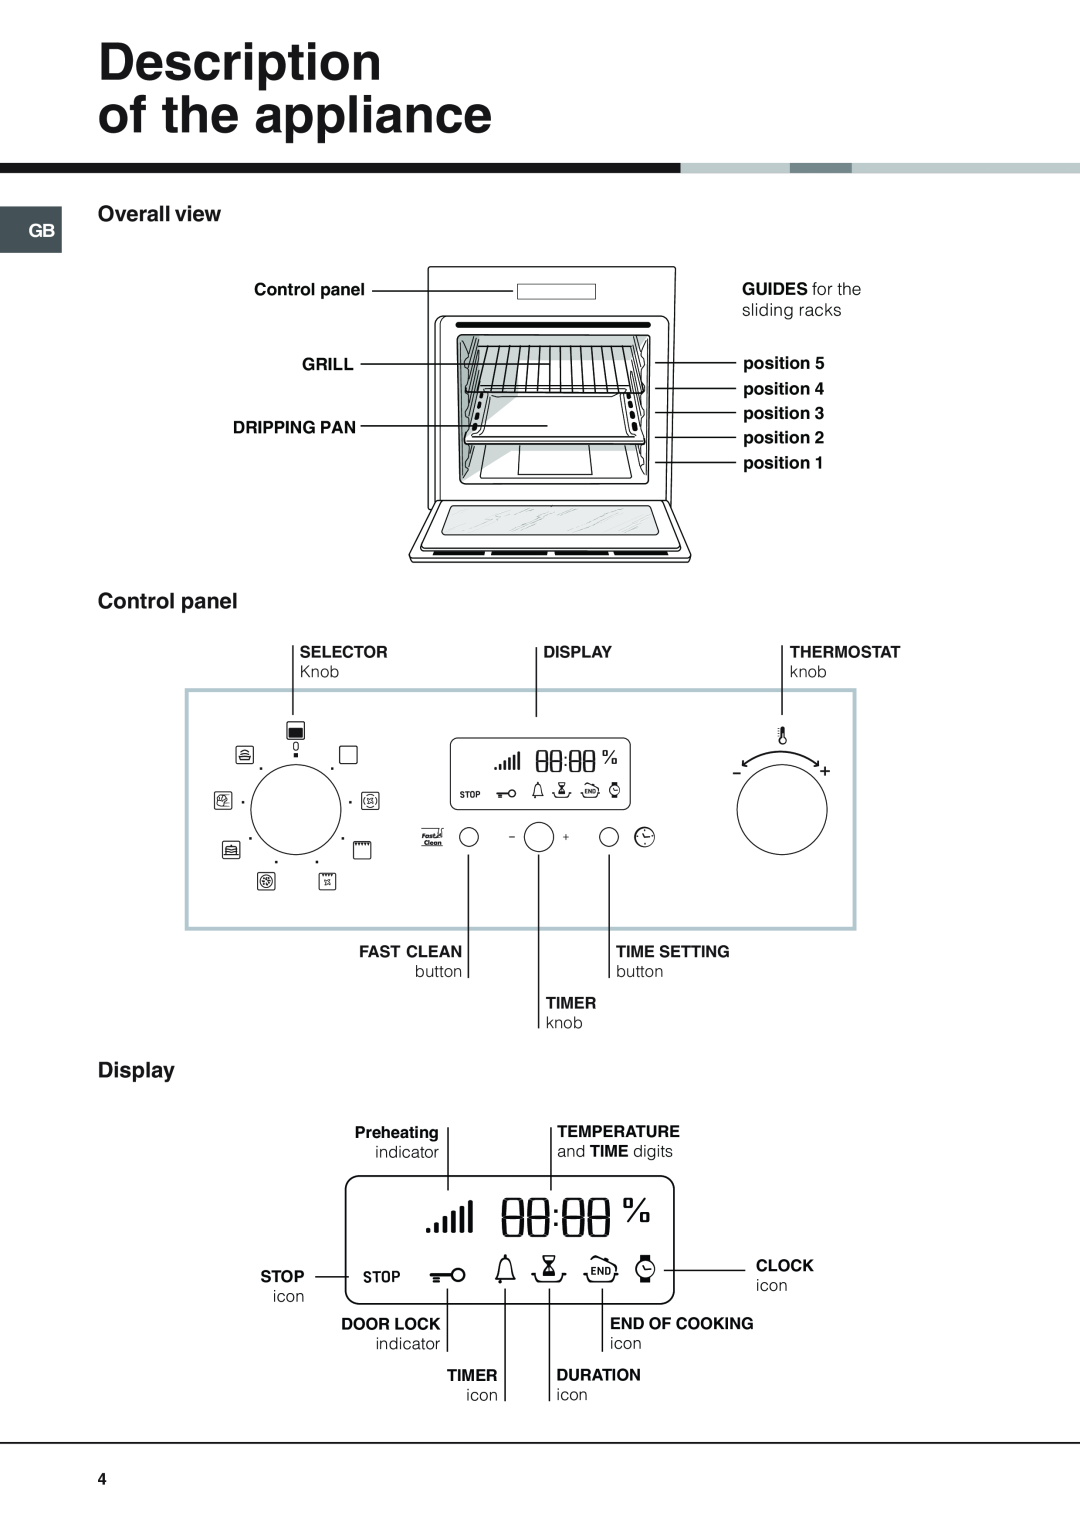 Xerox SH89PX, SY89PG, SE89PG X Description of the appliance, Overall view, Display, Control panel GRILL DRIPPING PAN 